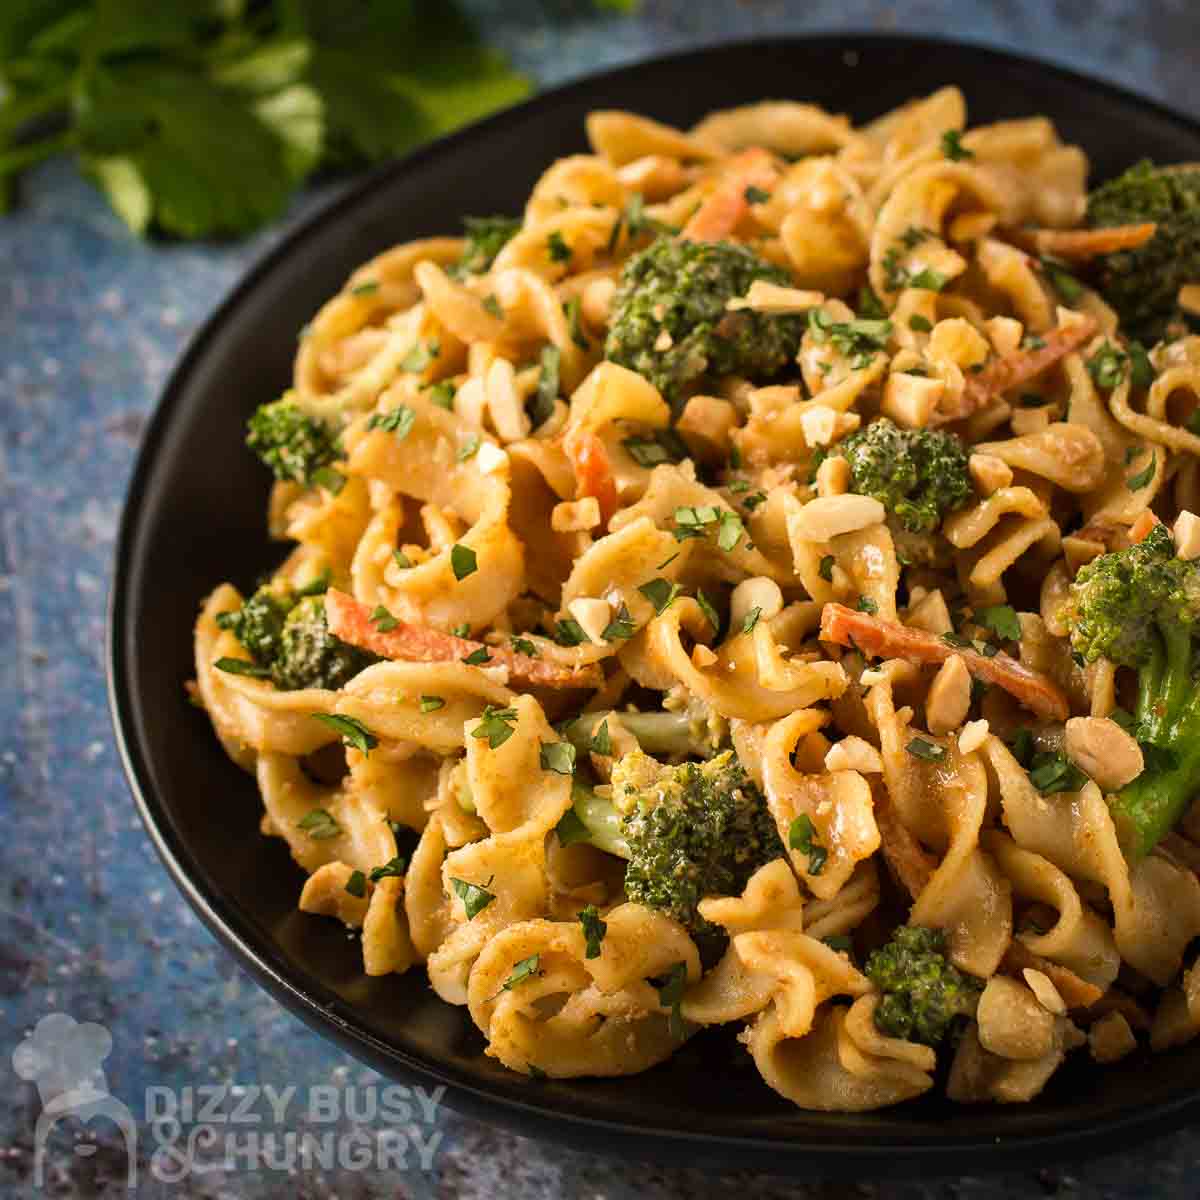 Easy Spicy Peanut Butter Broccoli With Noodles